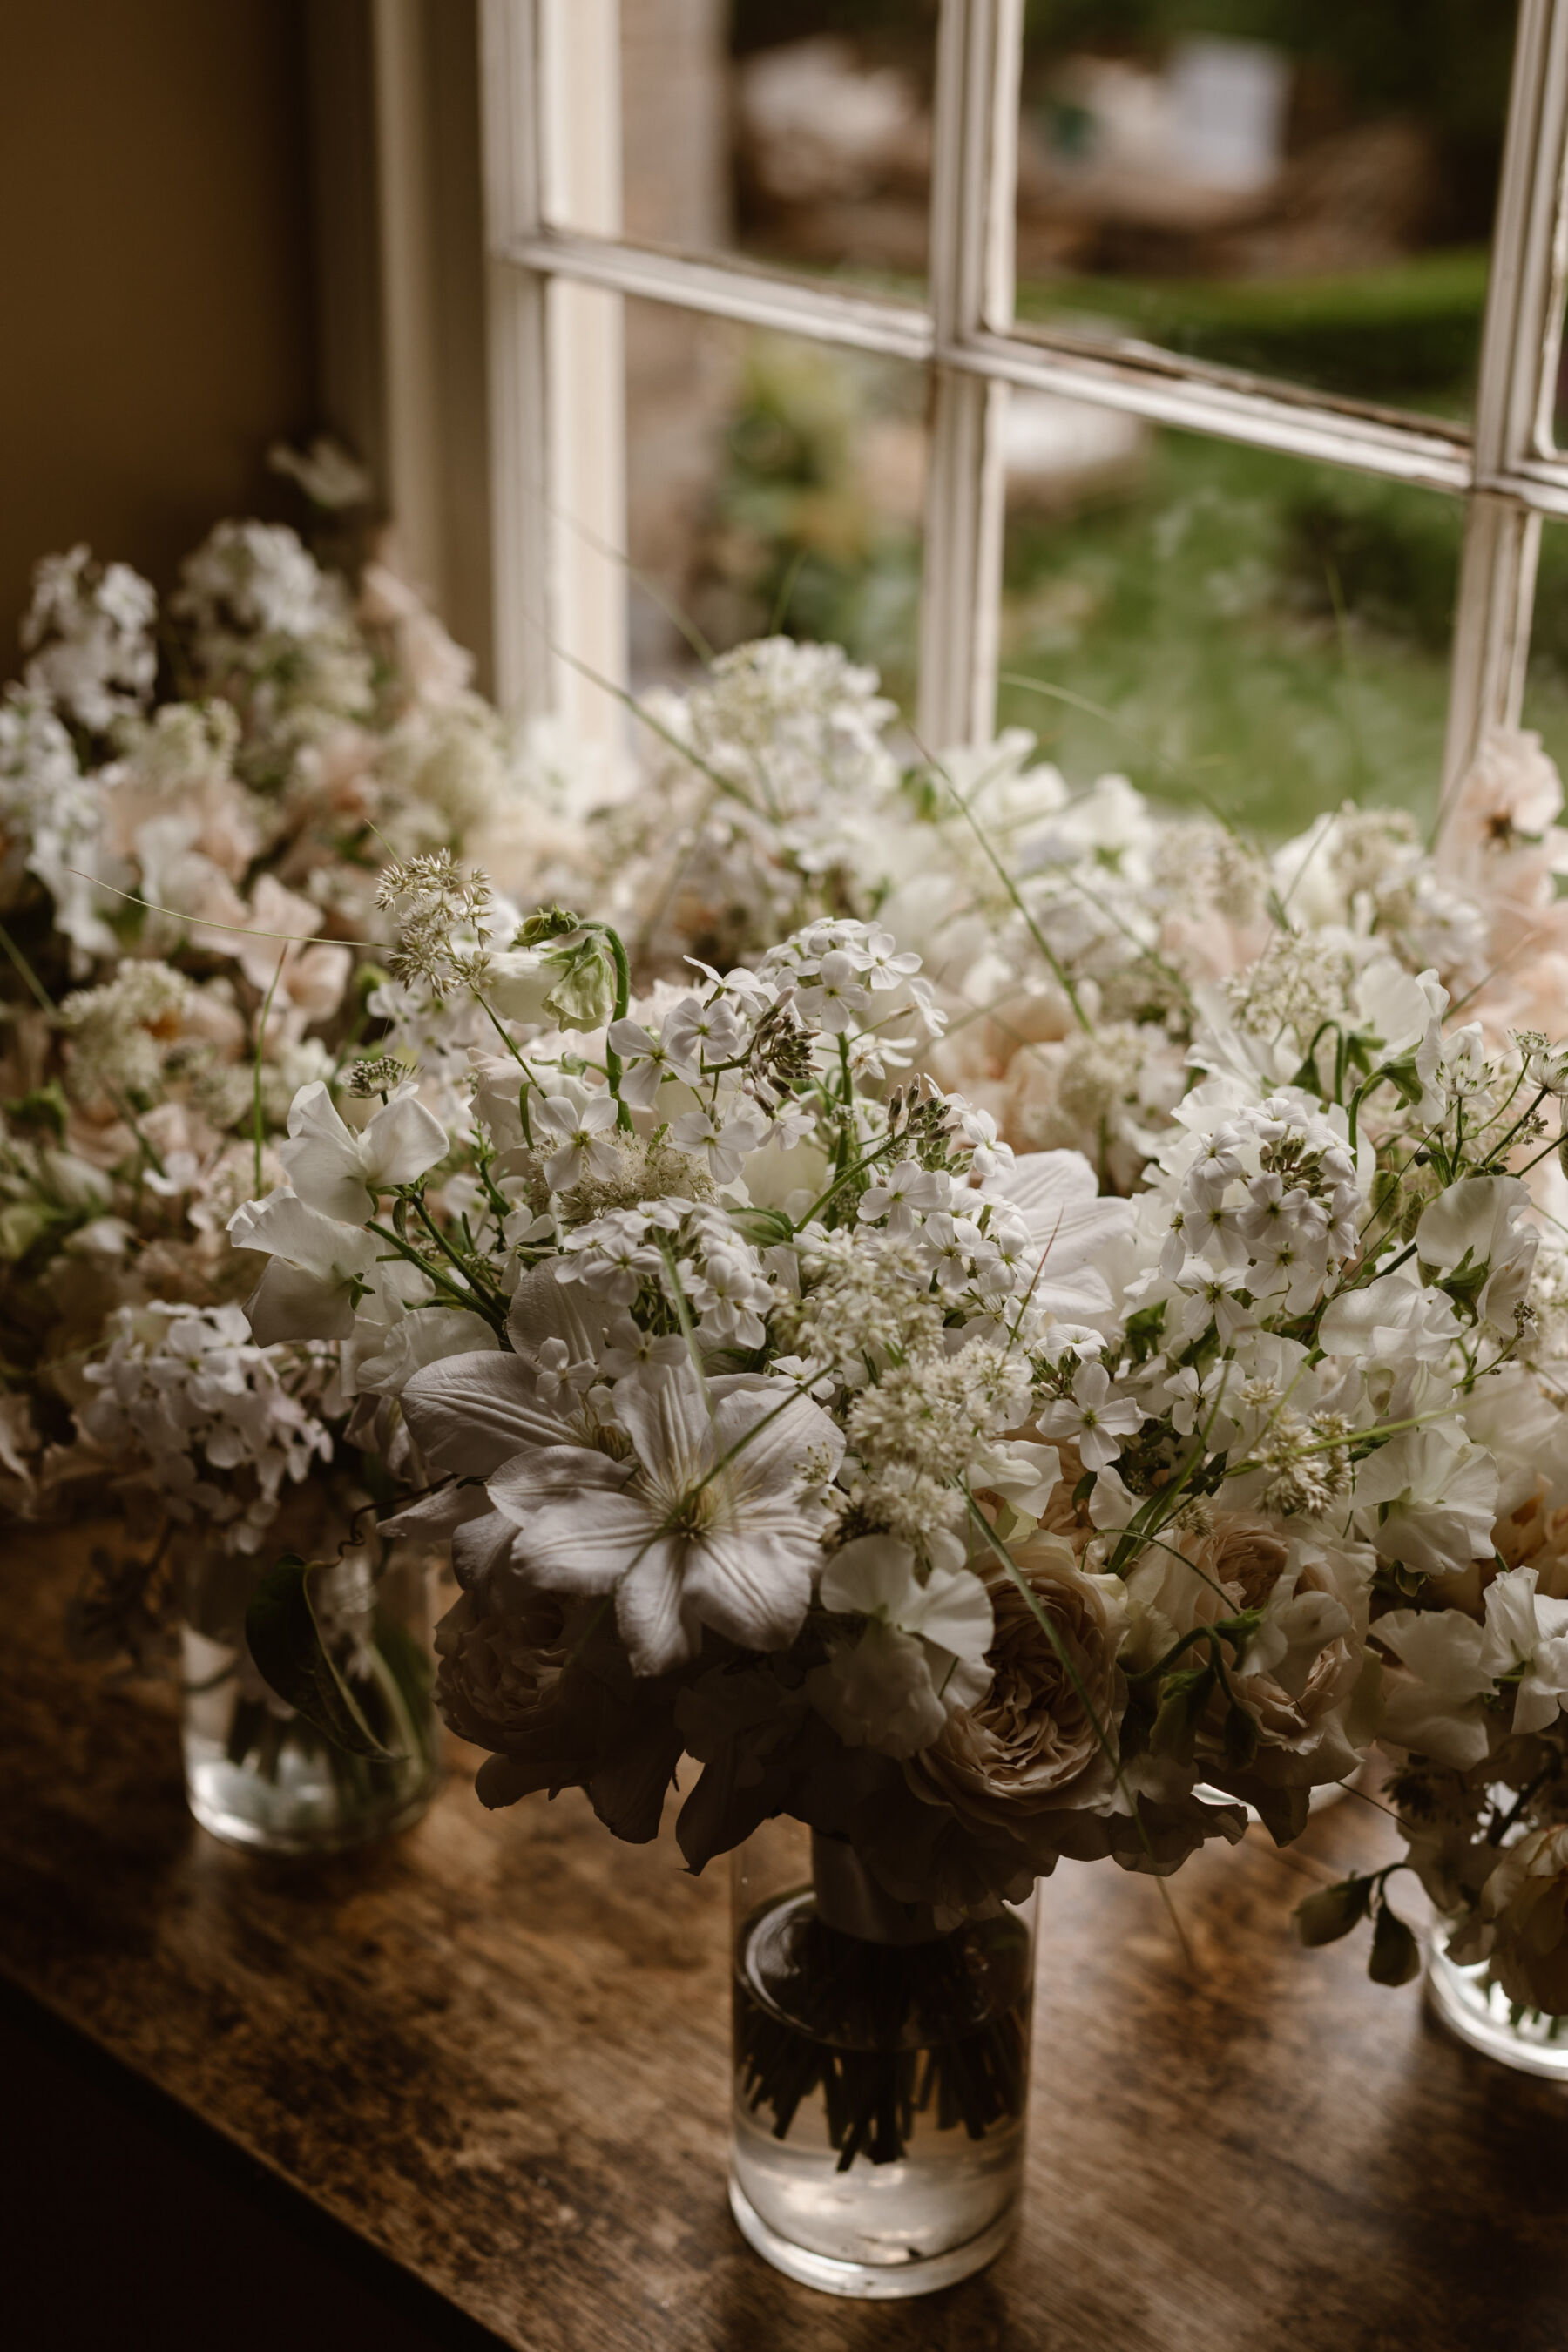 Delicate white and pale pink wedding bouquets by Liberty Lane Flowers. J Agnes Black Photography.